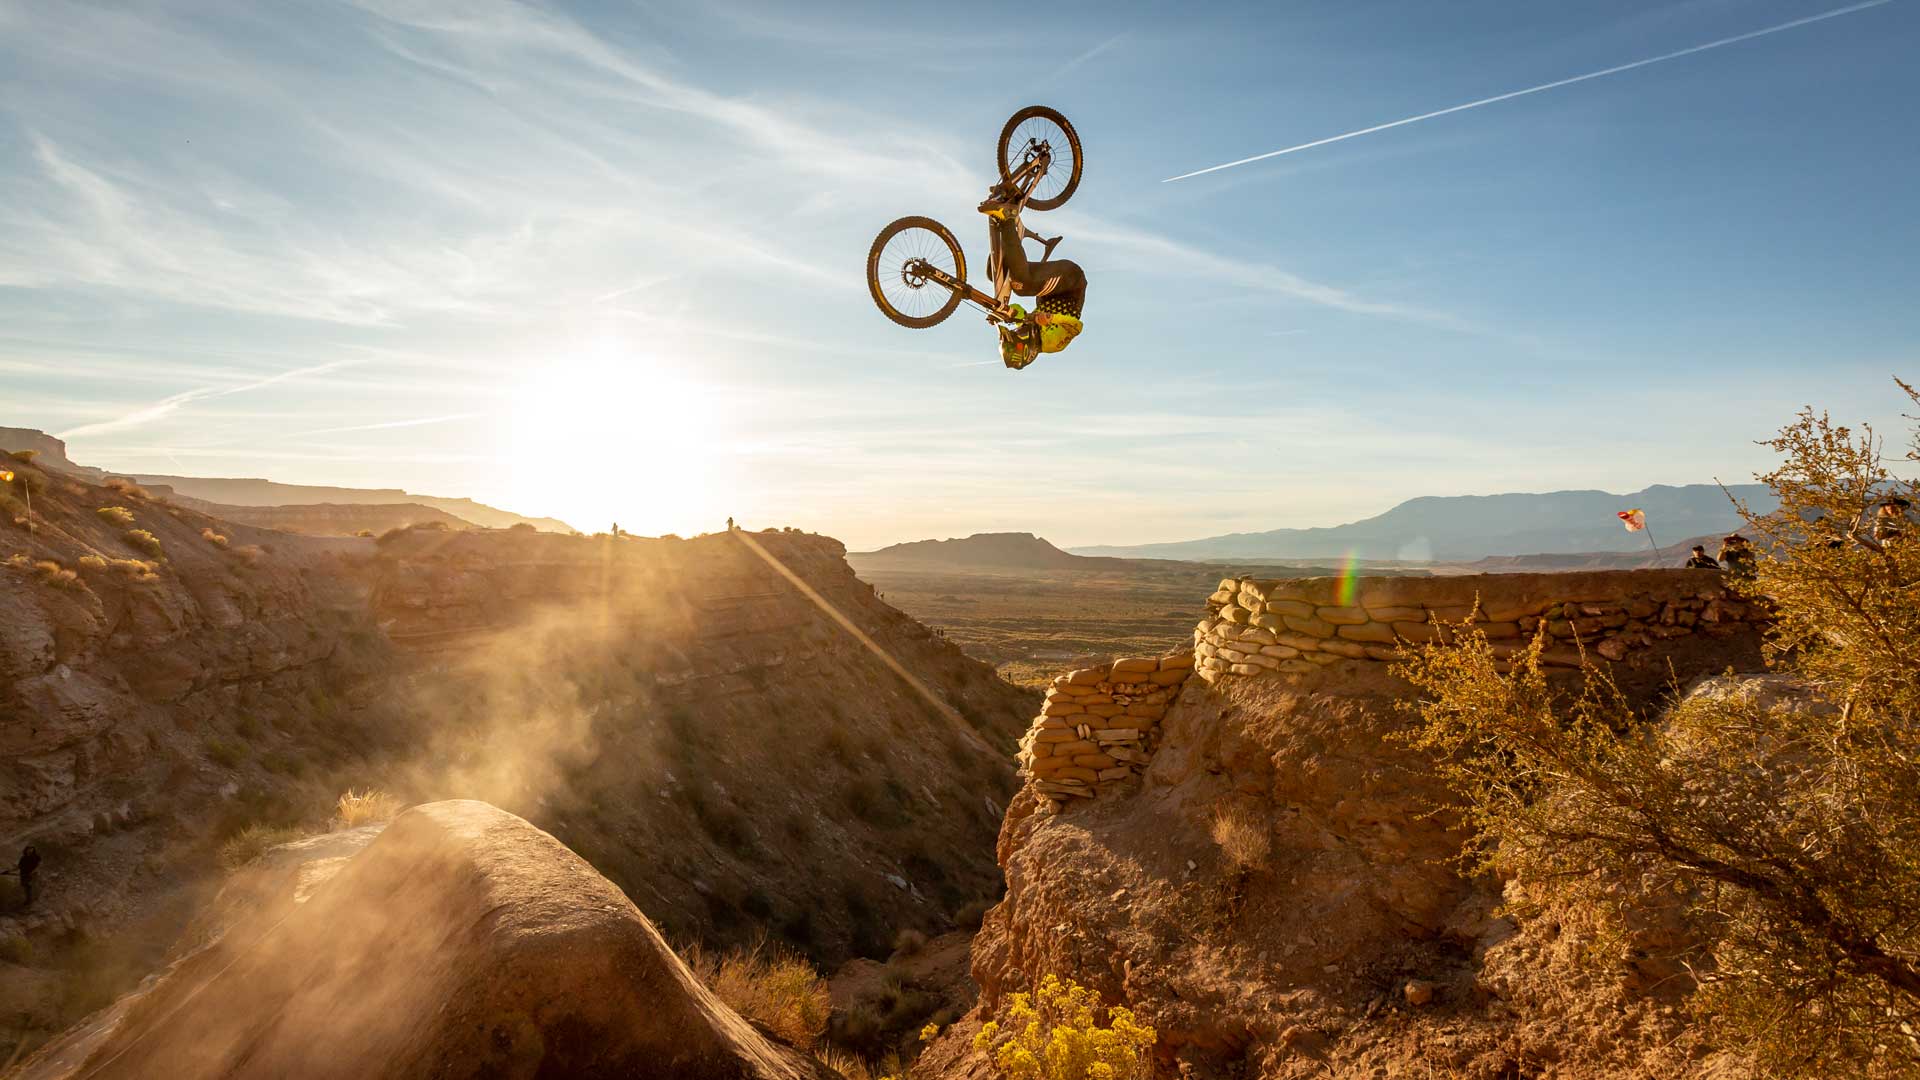 2019 red bull rampage